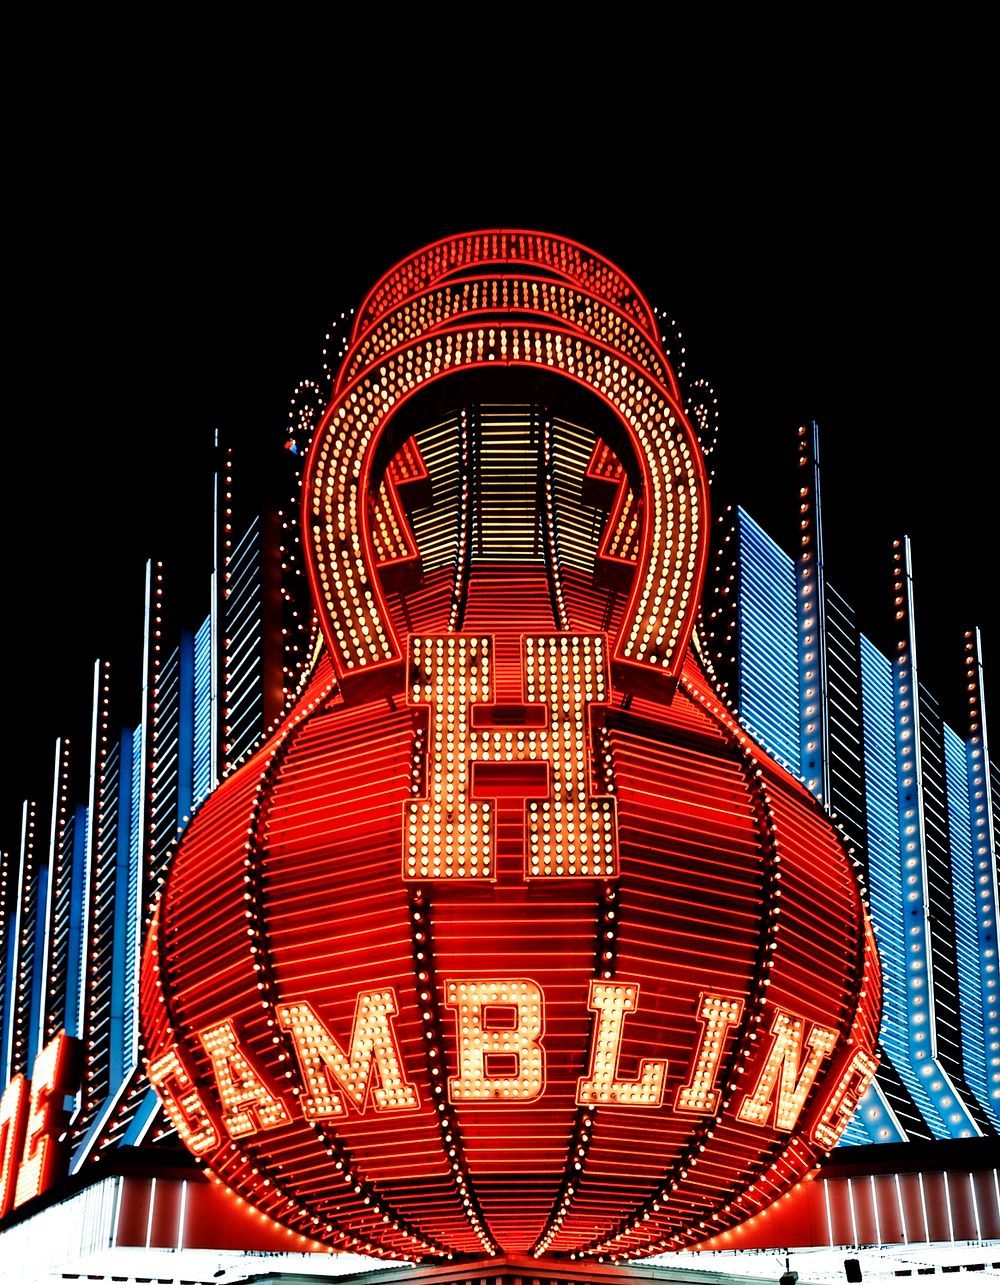 The Horseshoe Casino's neon sign. Original image from Carol M. Highsmith&rsquo;s America, Library of Congress collection.…